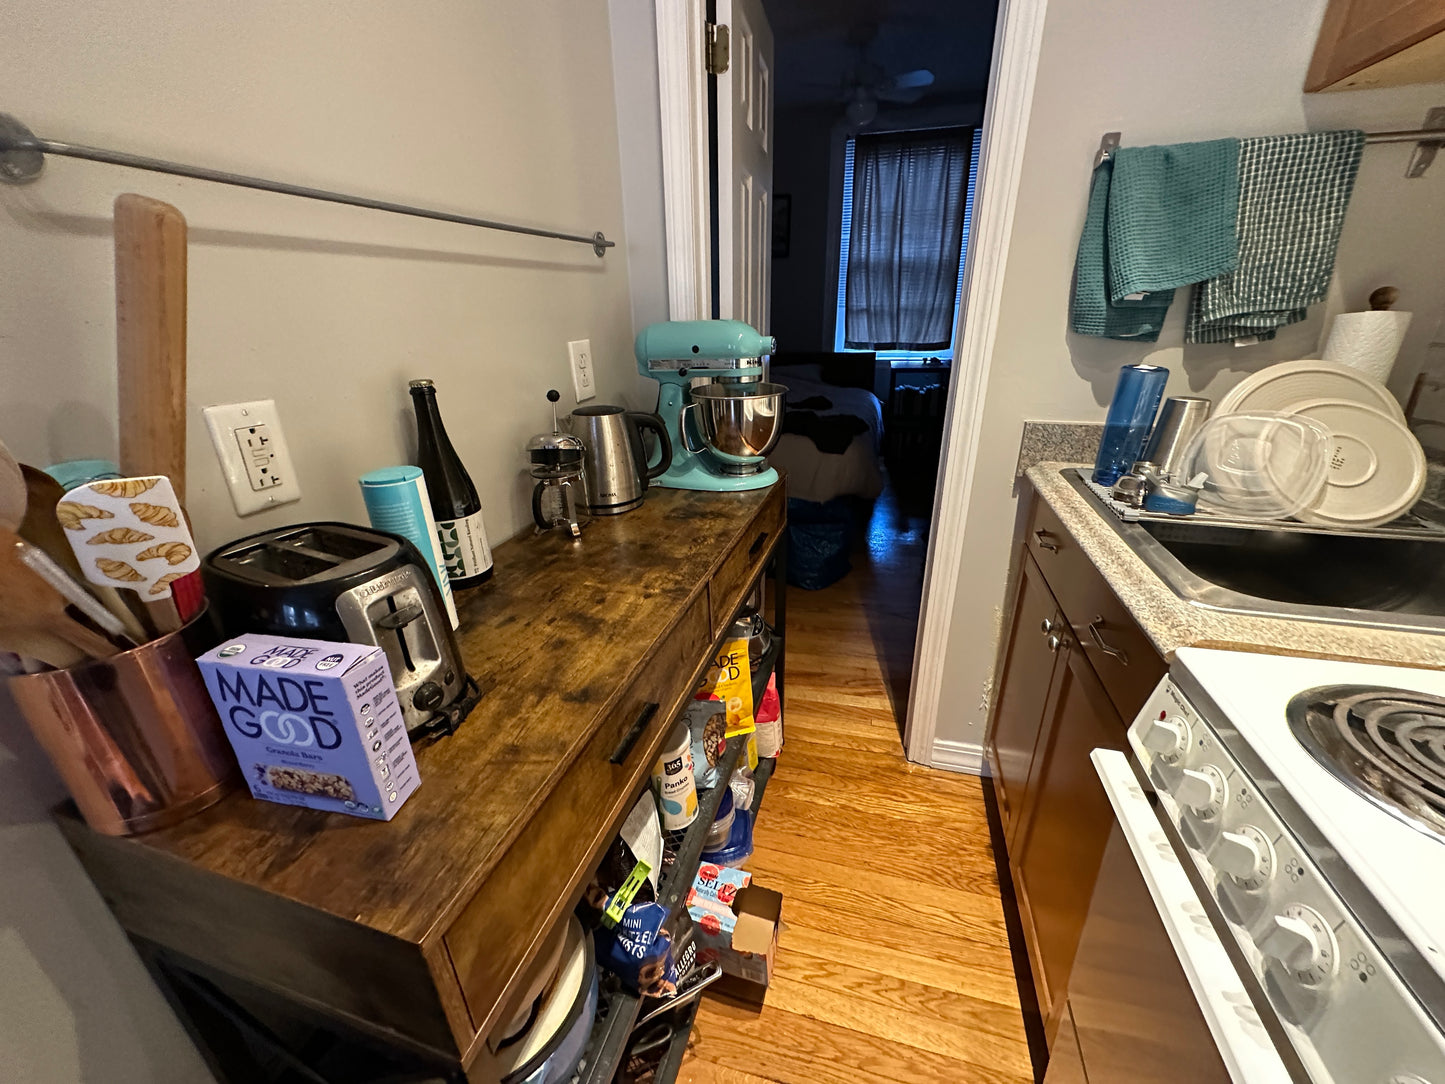 $2,500 / 1br - ➽Beautiful Beacon Hill 1 Bedroom w/HT & HW Included! Available 9/1! (Beacon Hill)